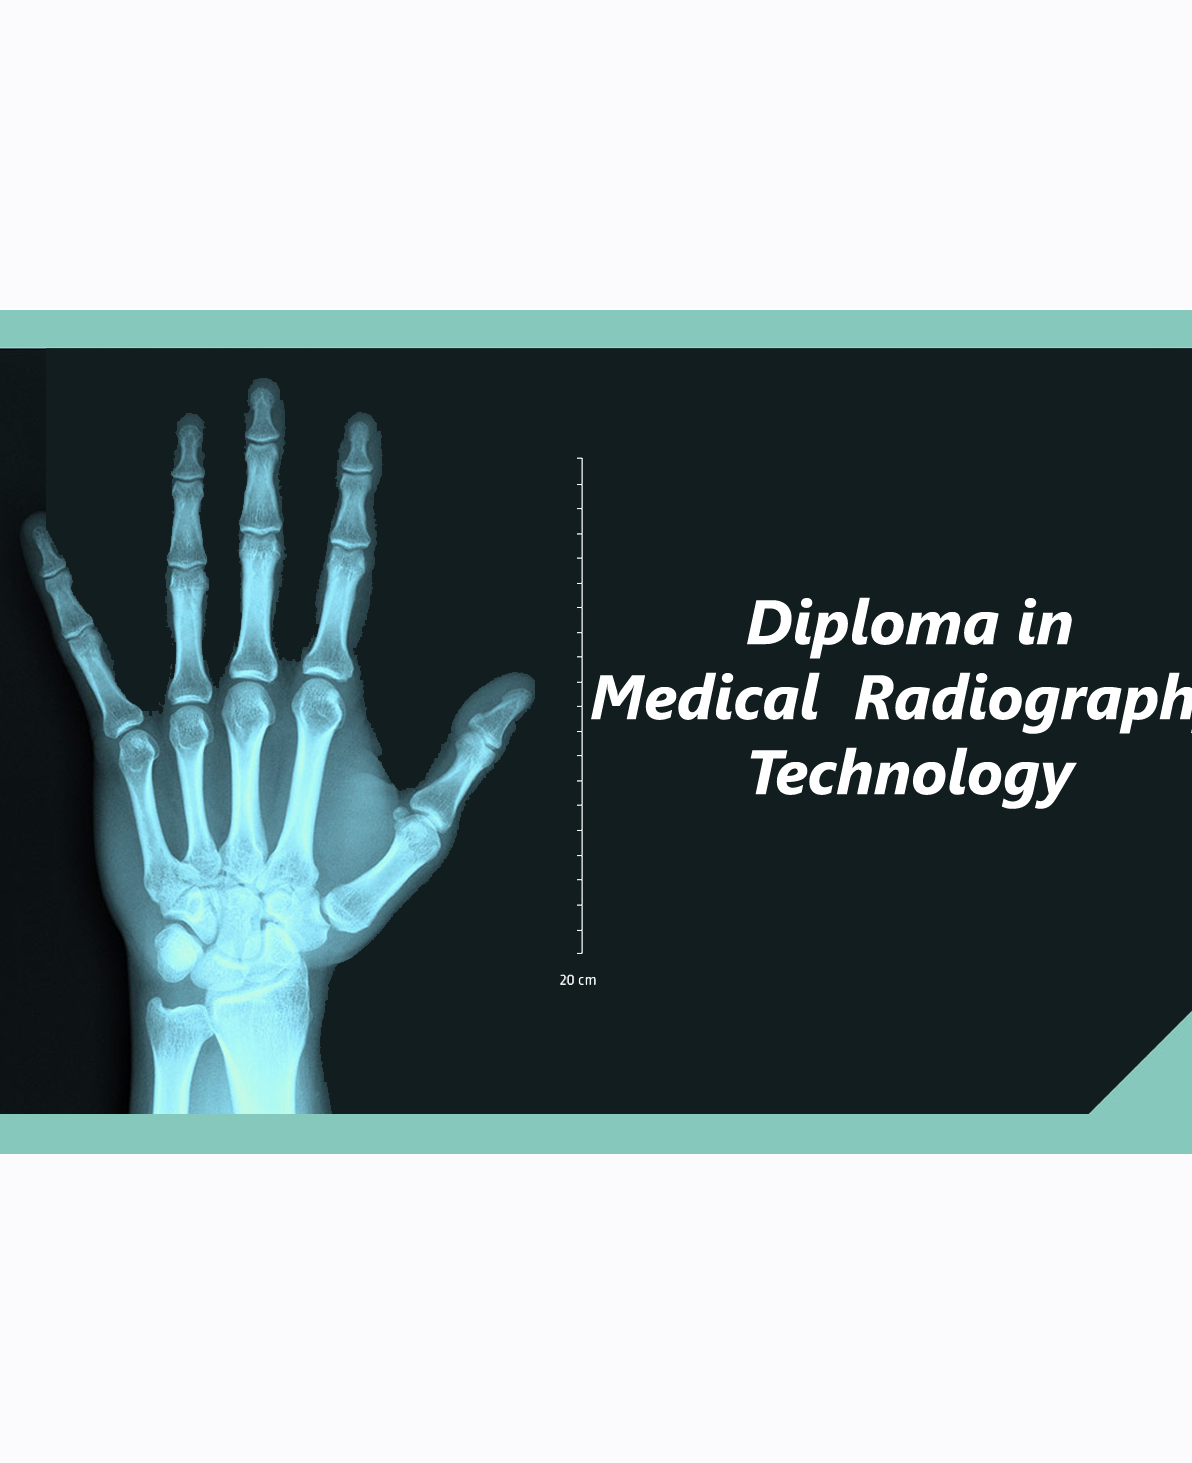 Diploma in Medical Radiography Technology